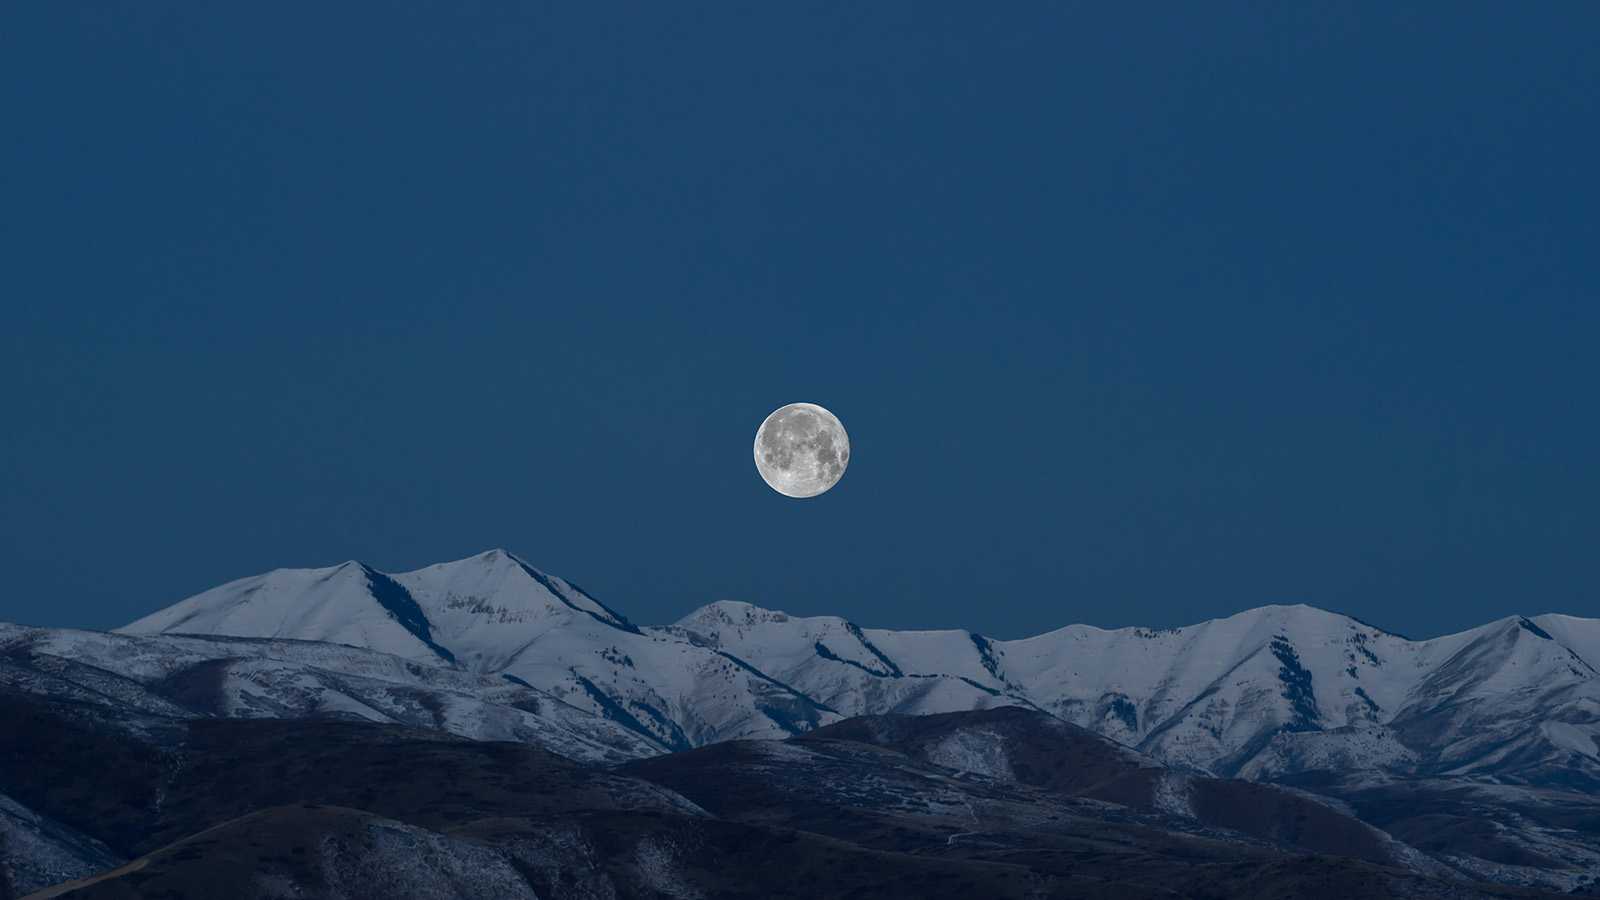 A full moon above snow-capped mountains